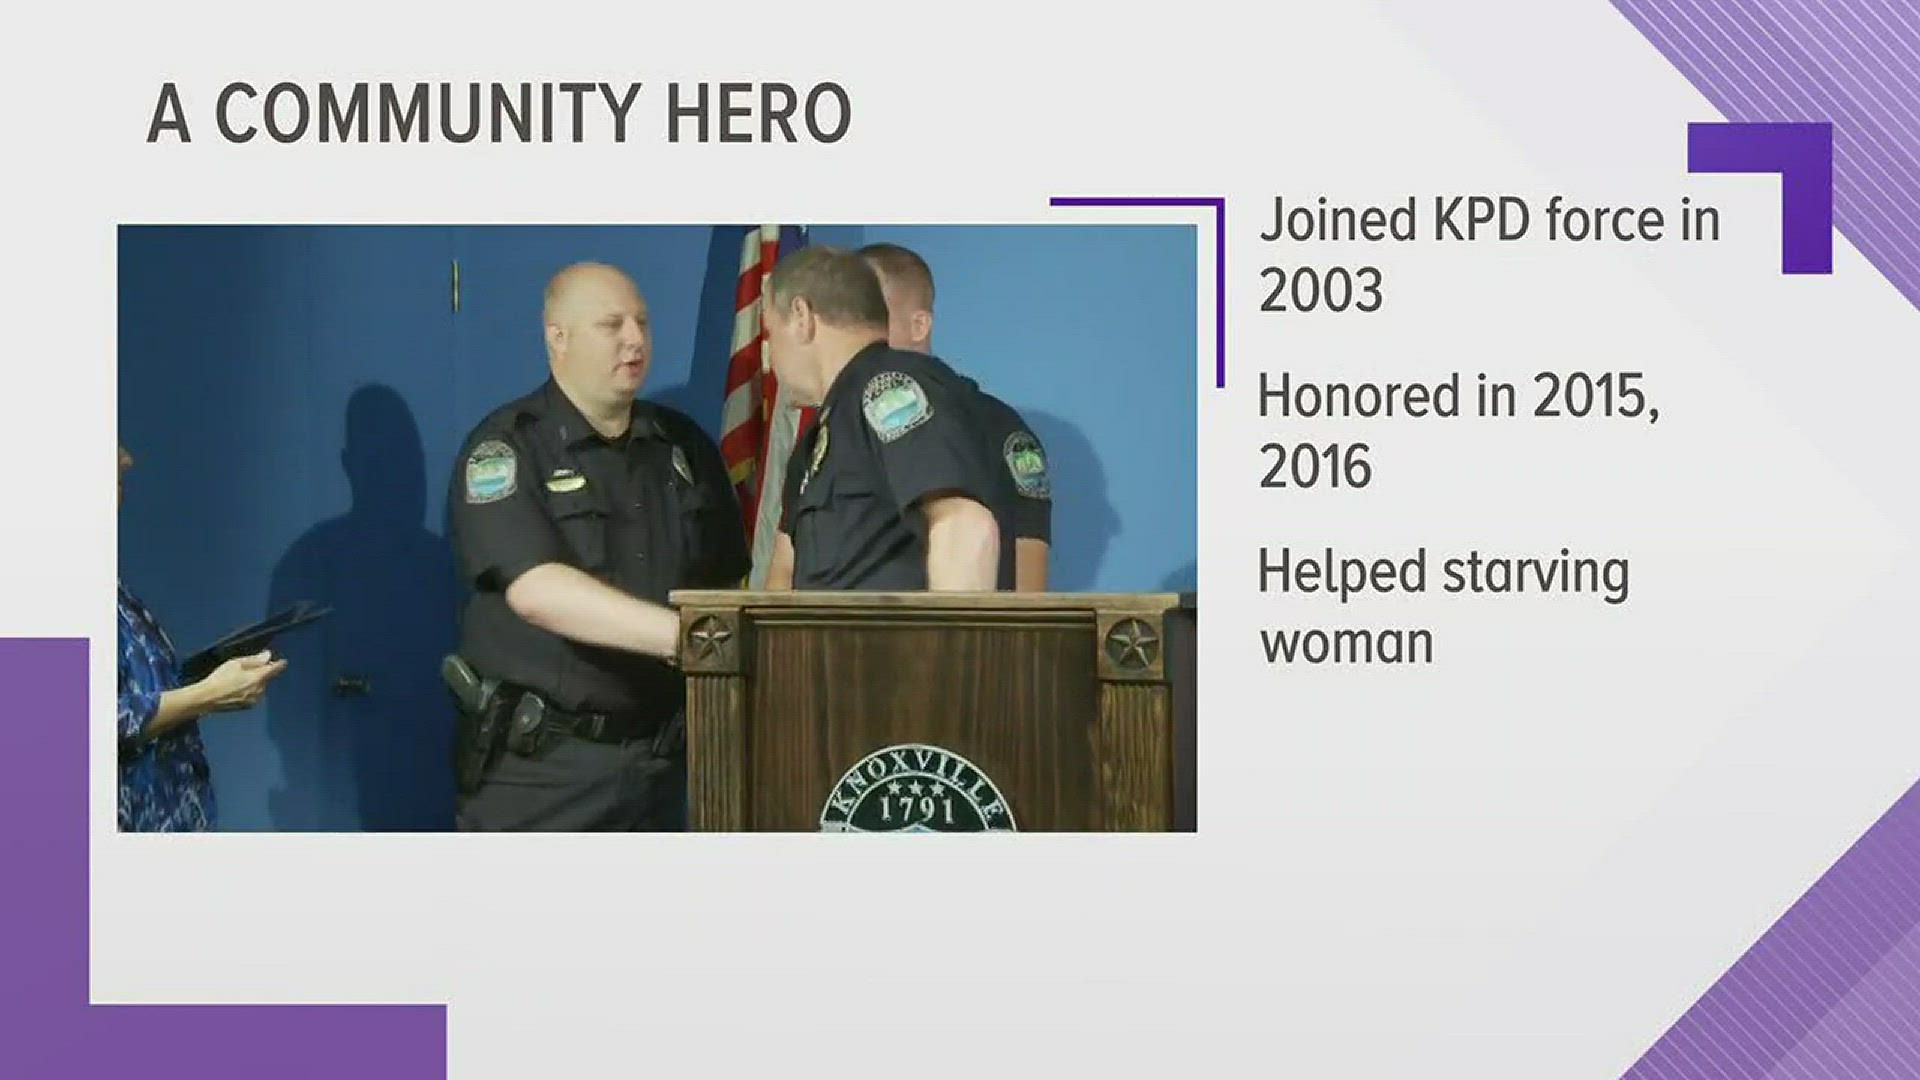 Officer Jay Williams has been serving his community for more than 14 years after joining the Knoxville police force in Nov. 2003. During his time as a KPD officer, Williams has been noted for his compassion and service within the community.